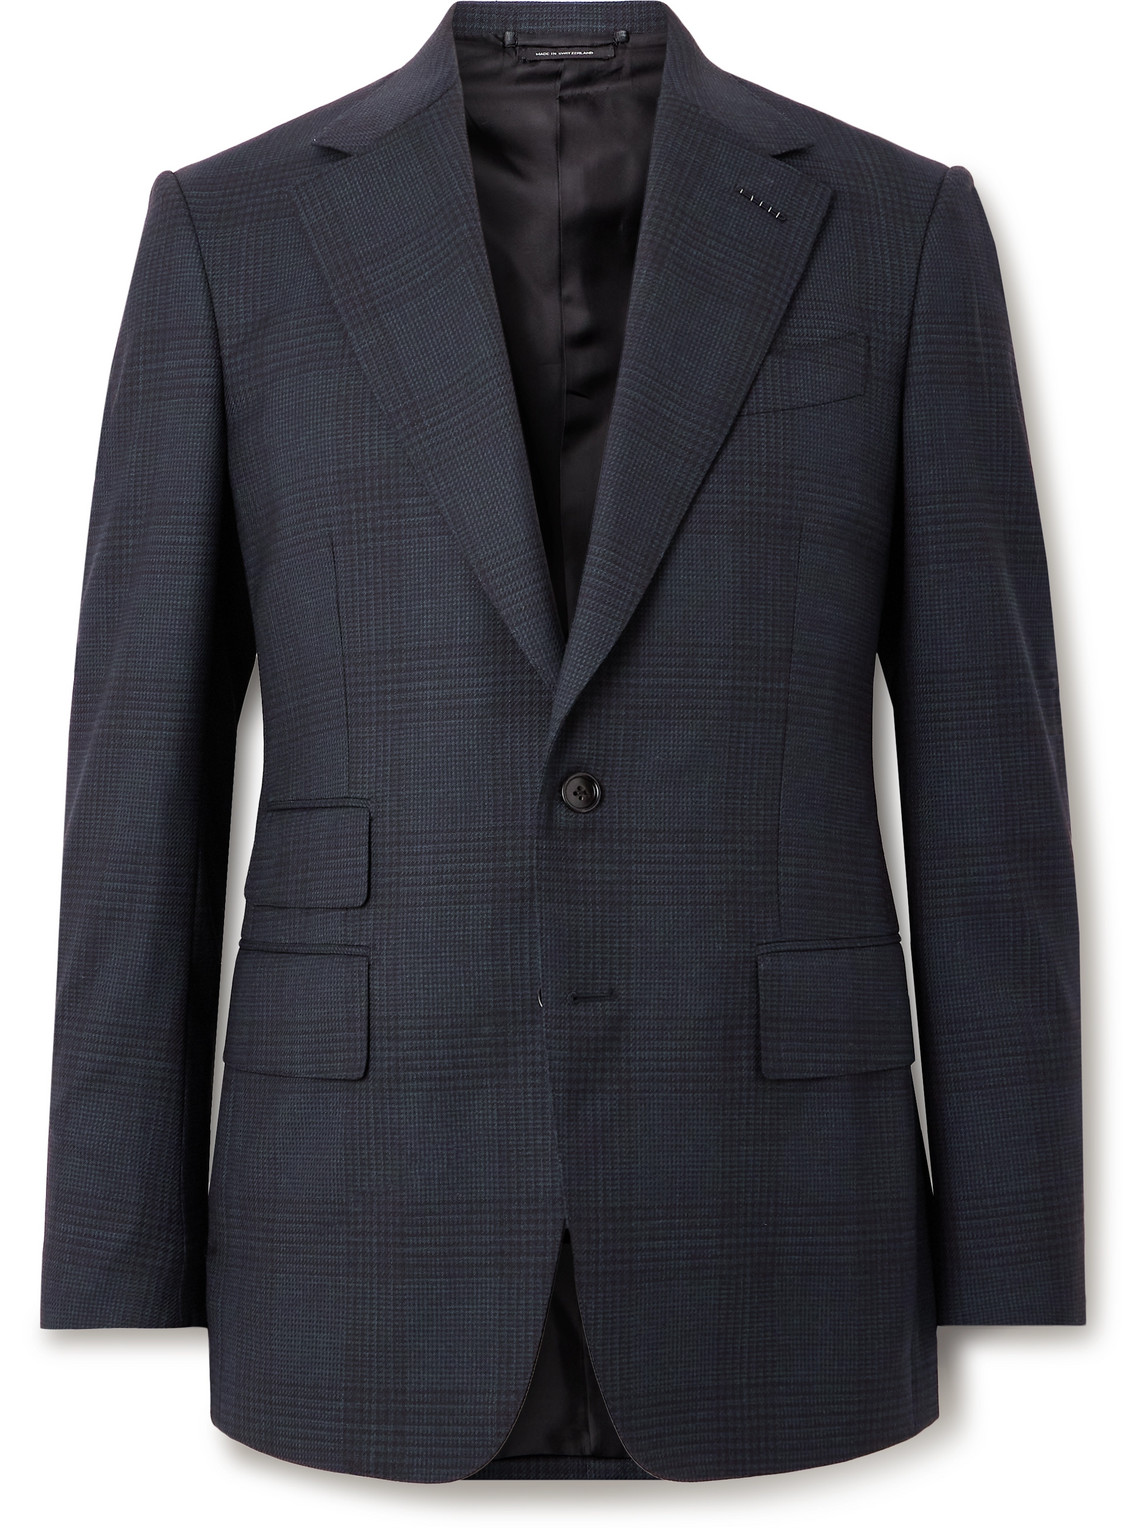 TOM FORD SHELTON SLIM-FIT PRINCE OF WALES CHECKED STRETCH-WOOL SUIT JACKET